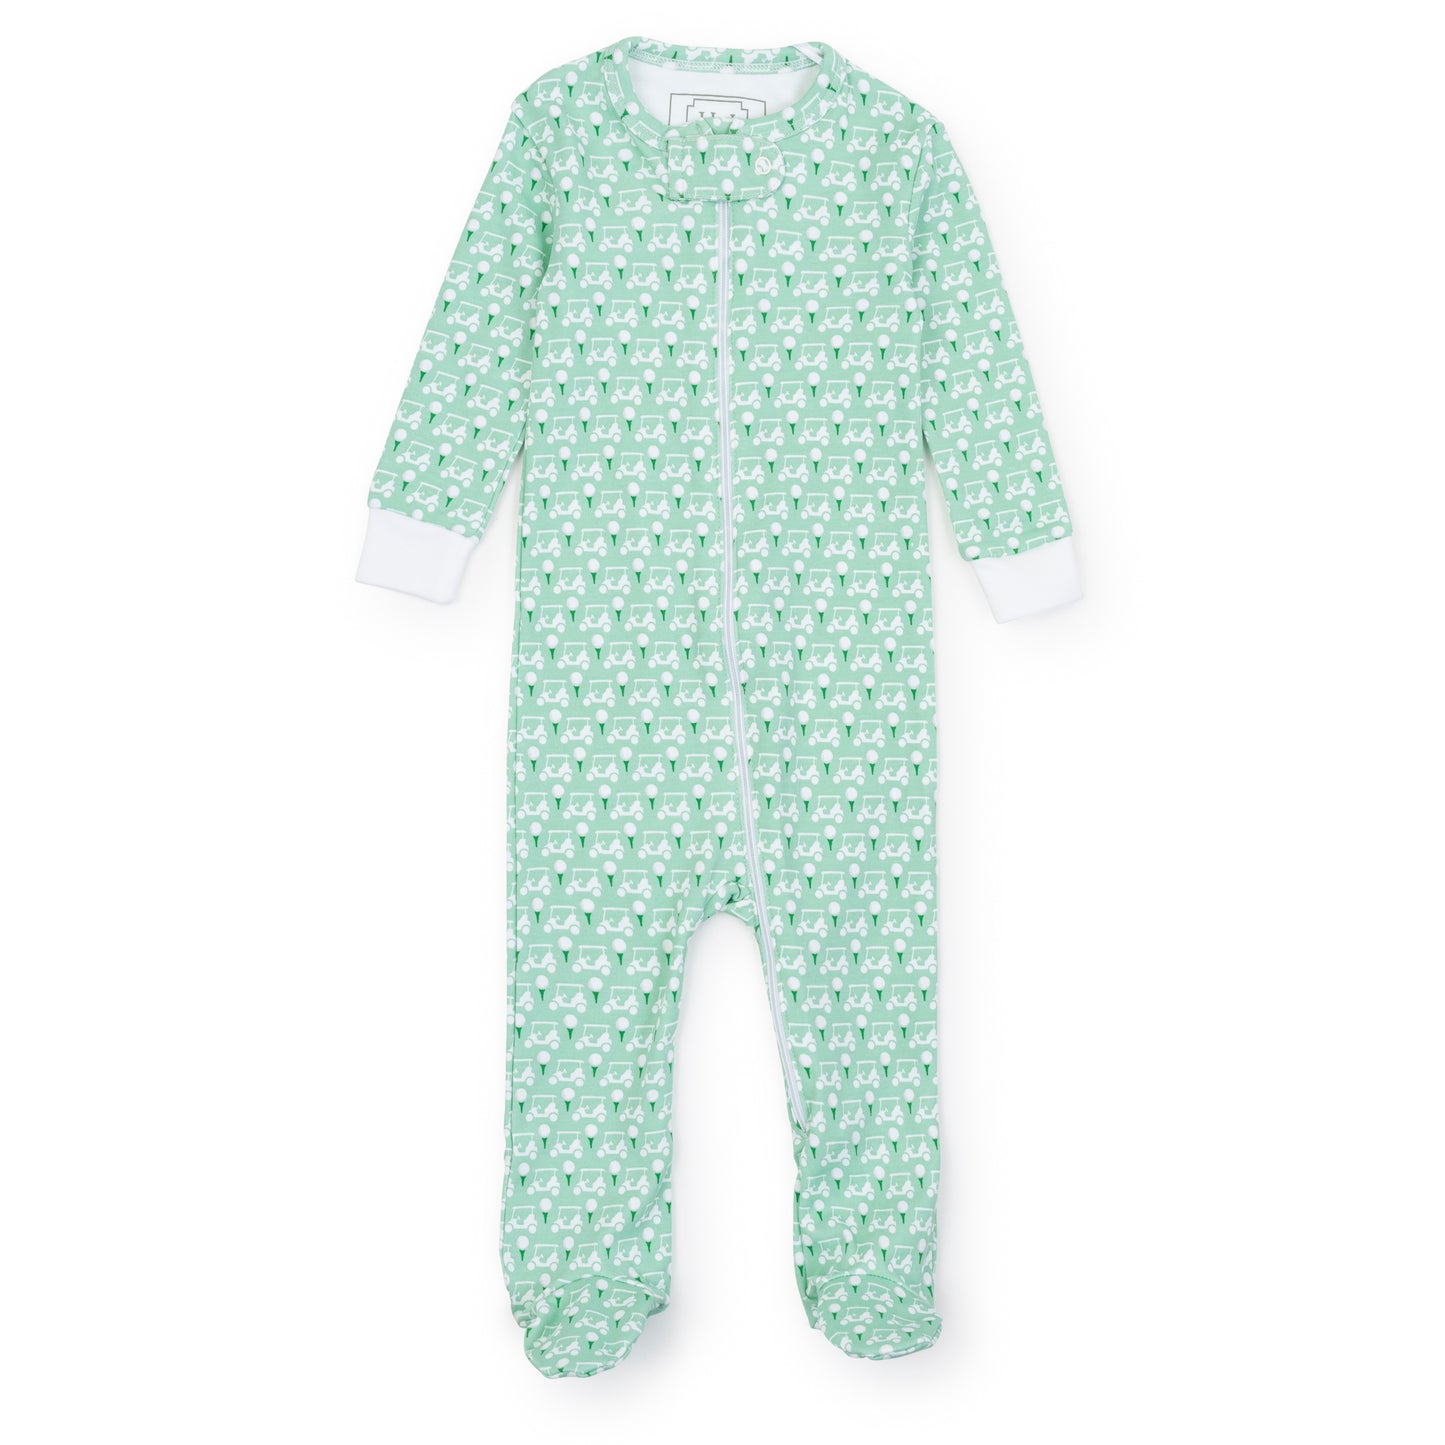 Lila and Hayes Parker Zipper Pajama - Golf Putting Green